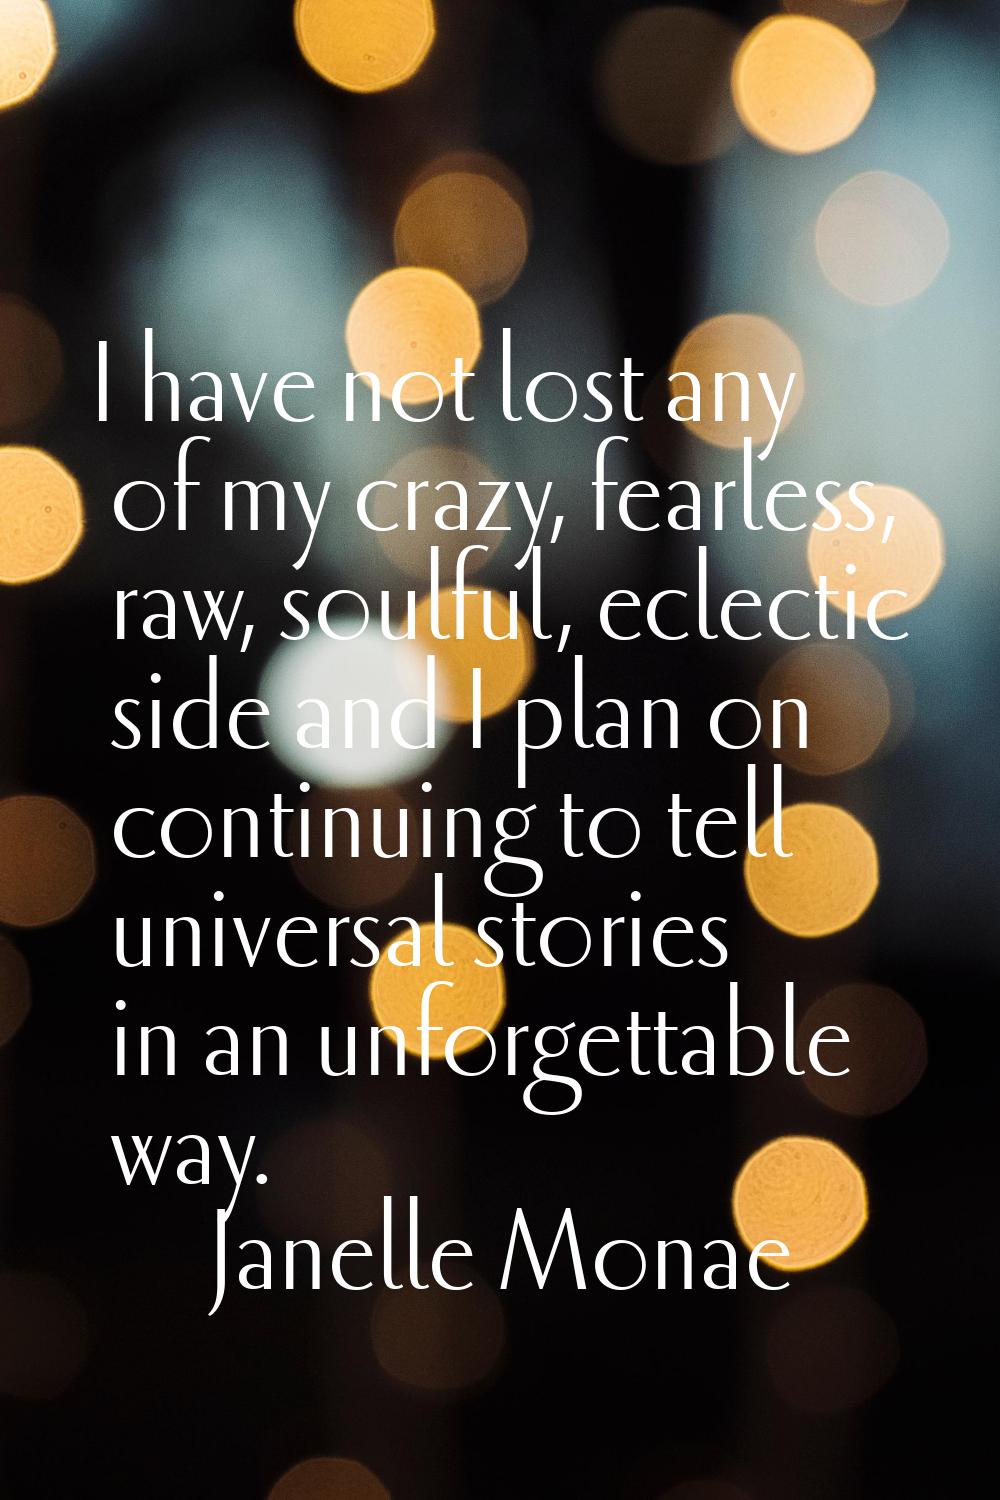 I have not lost any of my crazy, fearless, raw, soulful, eclectic side and I plan on continuing to 